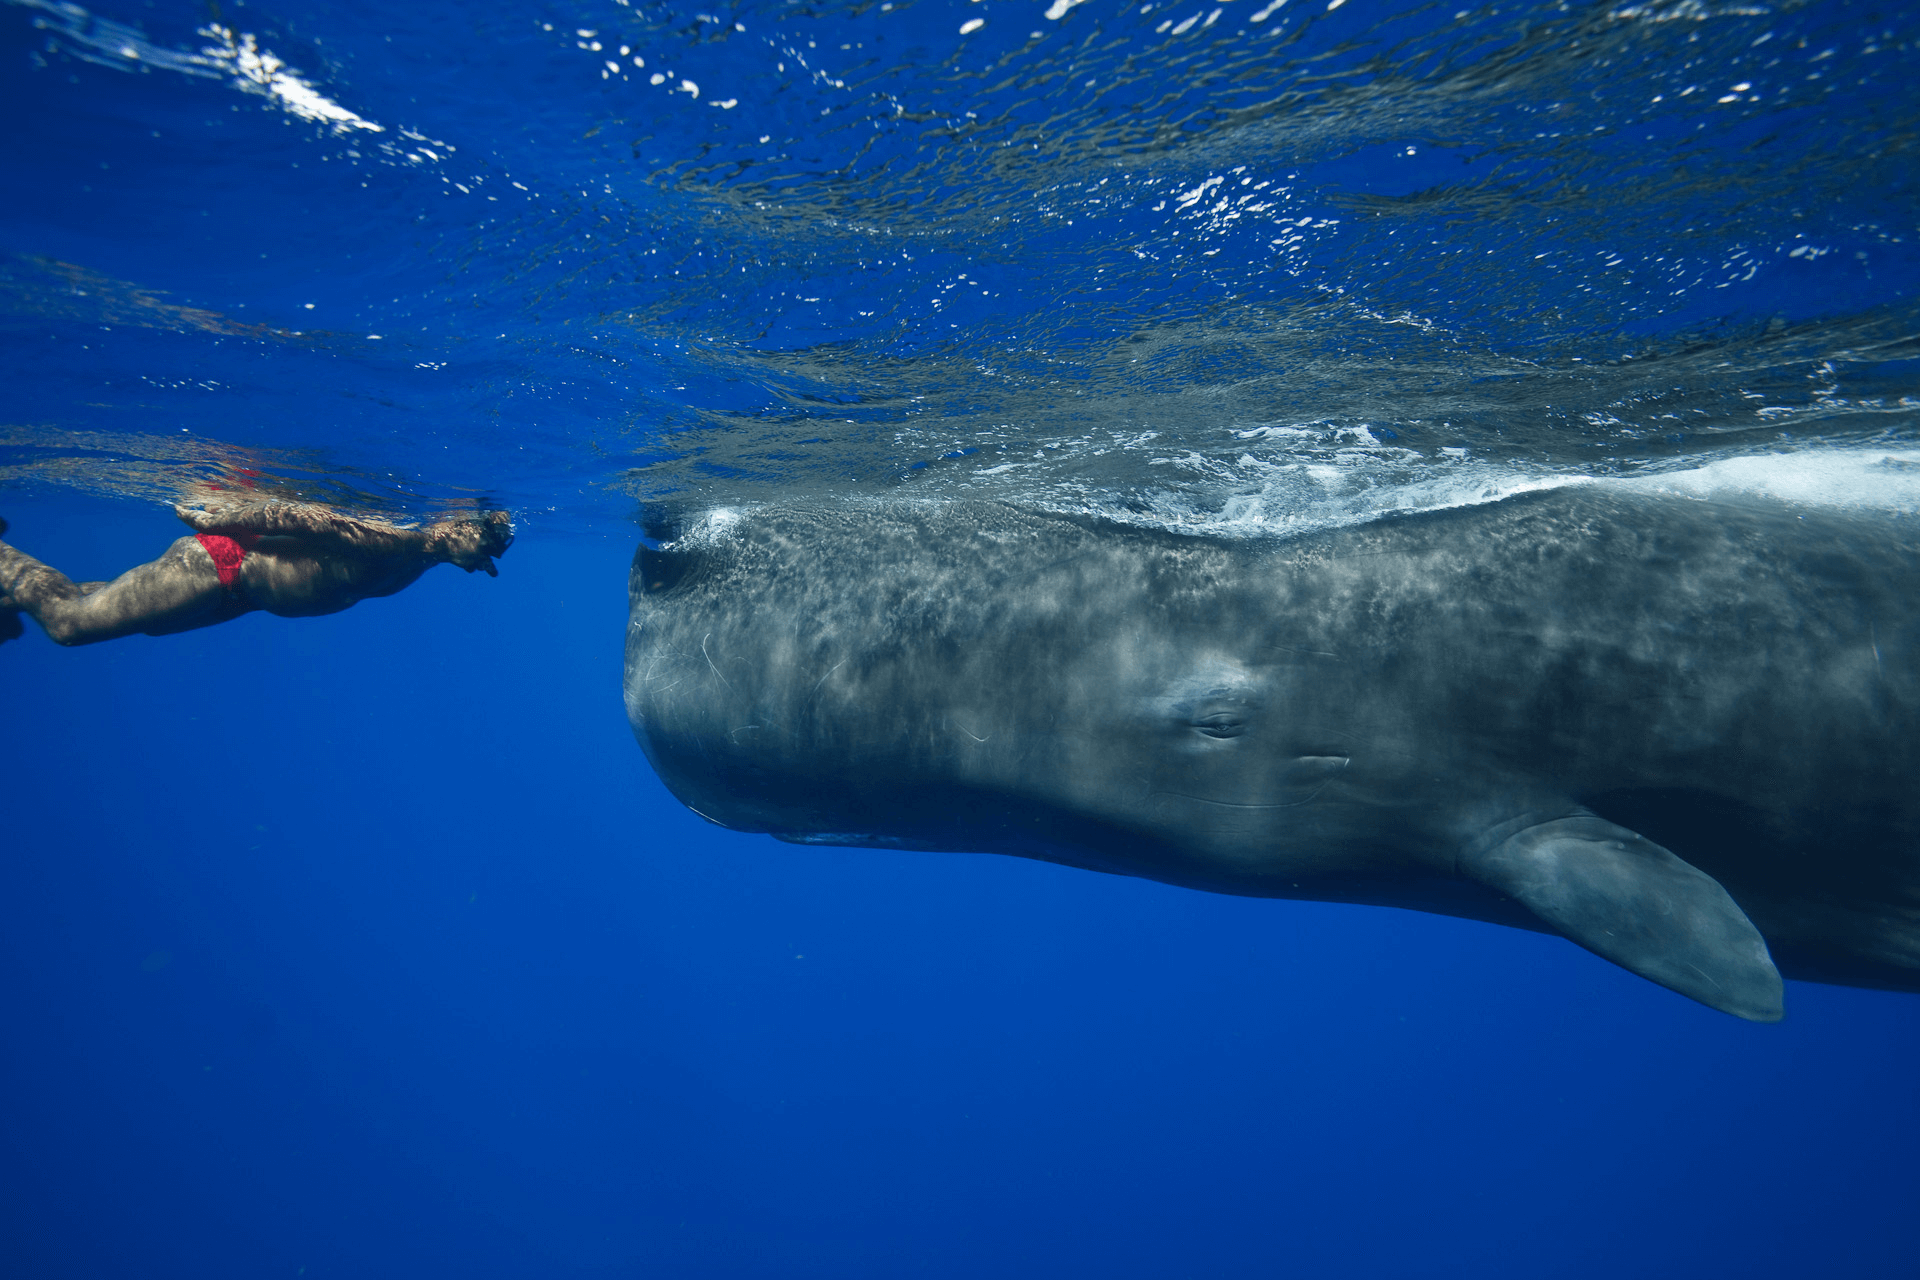 A diver meet a huge whale face to face in Trincomalee sea Sri Lanka